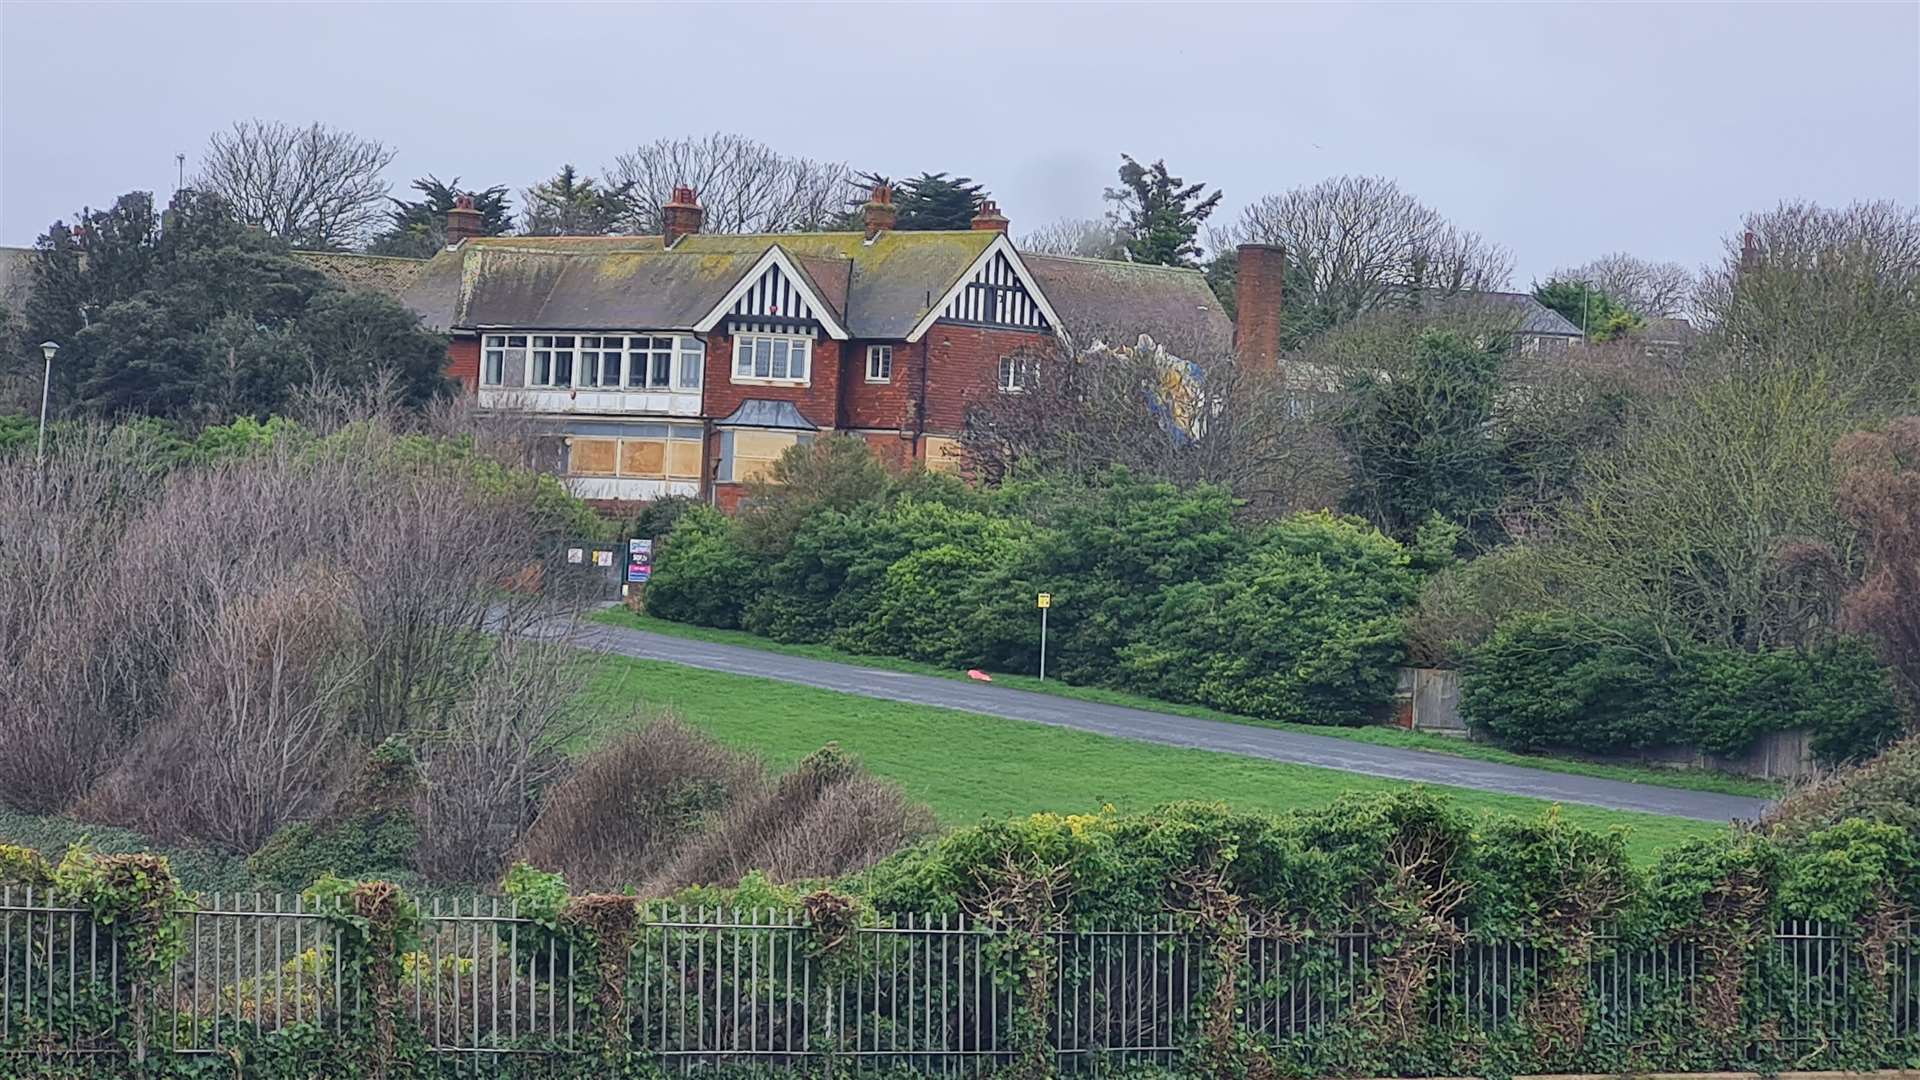 The former Laleham Gap School site n Broadstairs is being sold for redevelopment